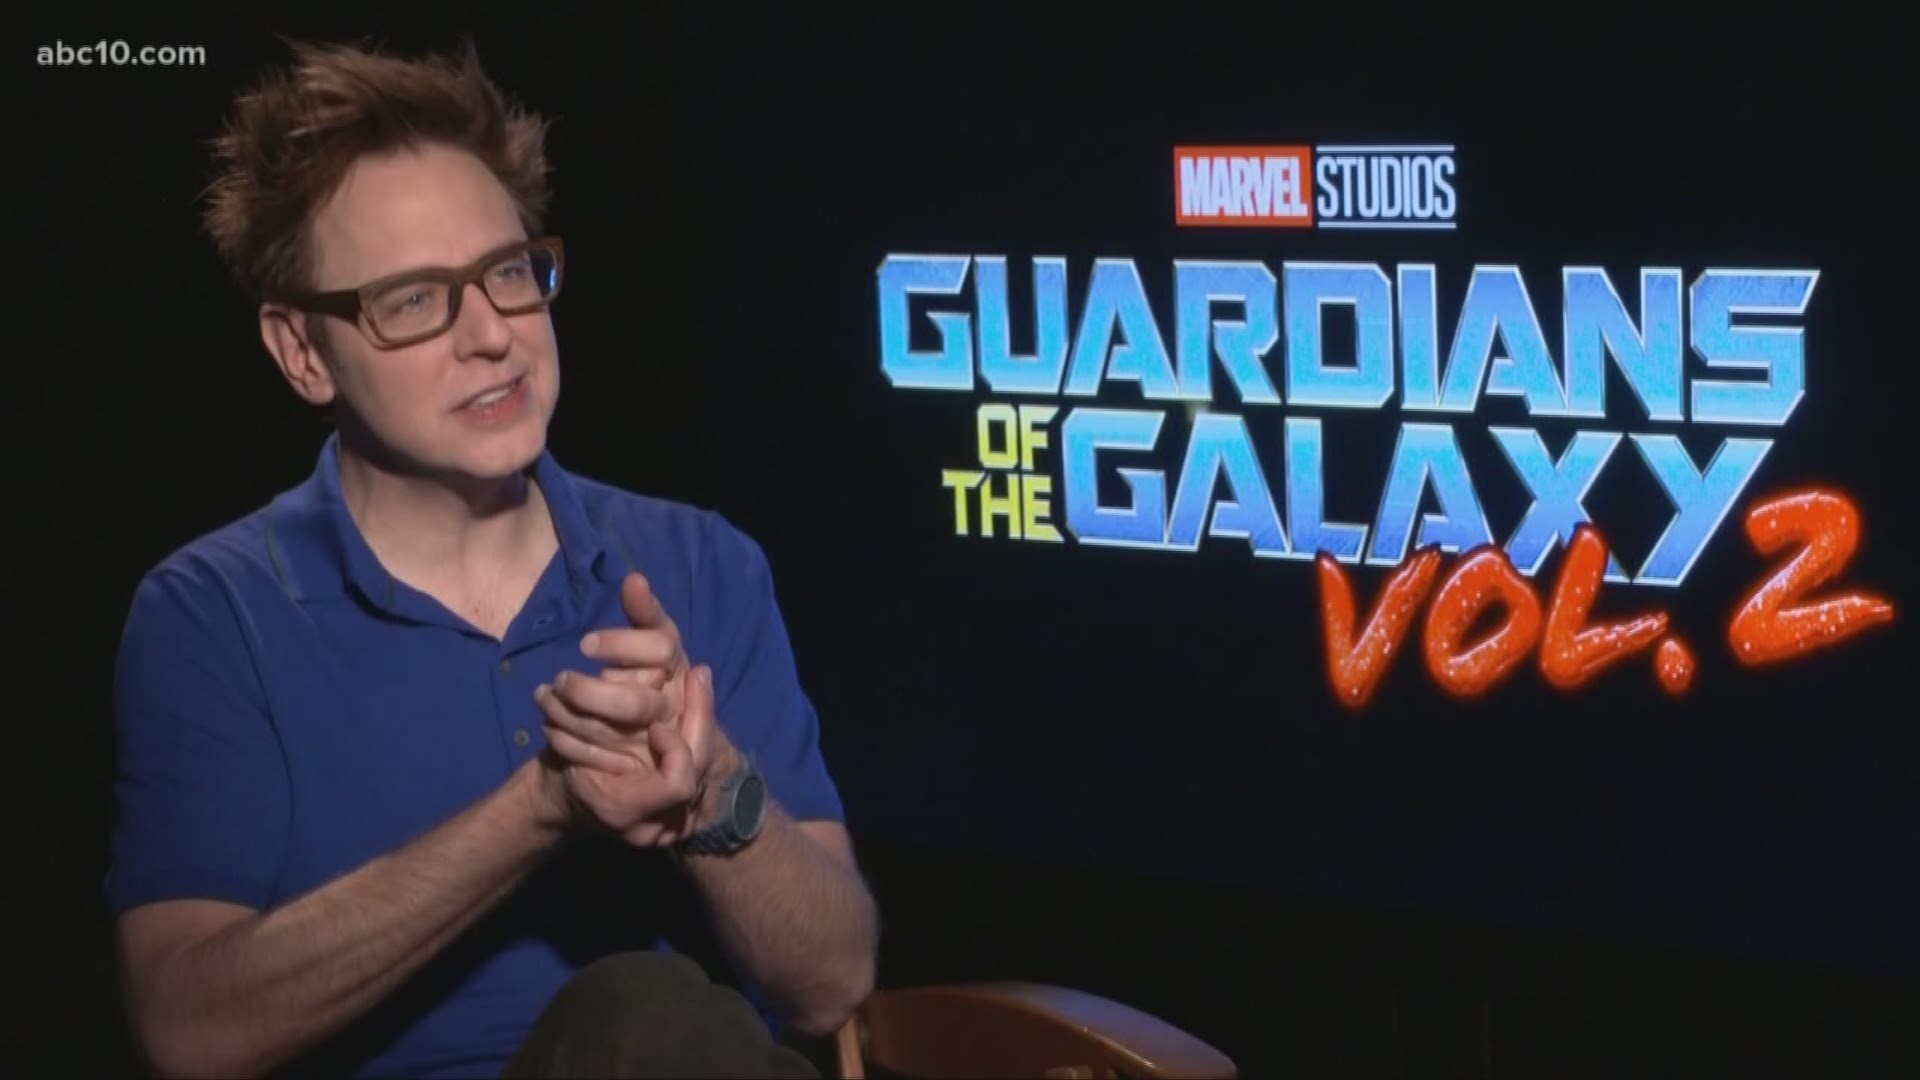 After firing him last year because of old tweets, Disney announced it will bring back director James Gunn for "Guardians of the Galaxy 3." Mark S. Allen has your entertainment headlines.